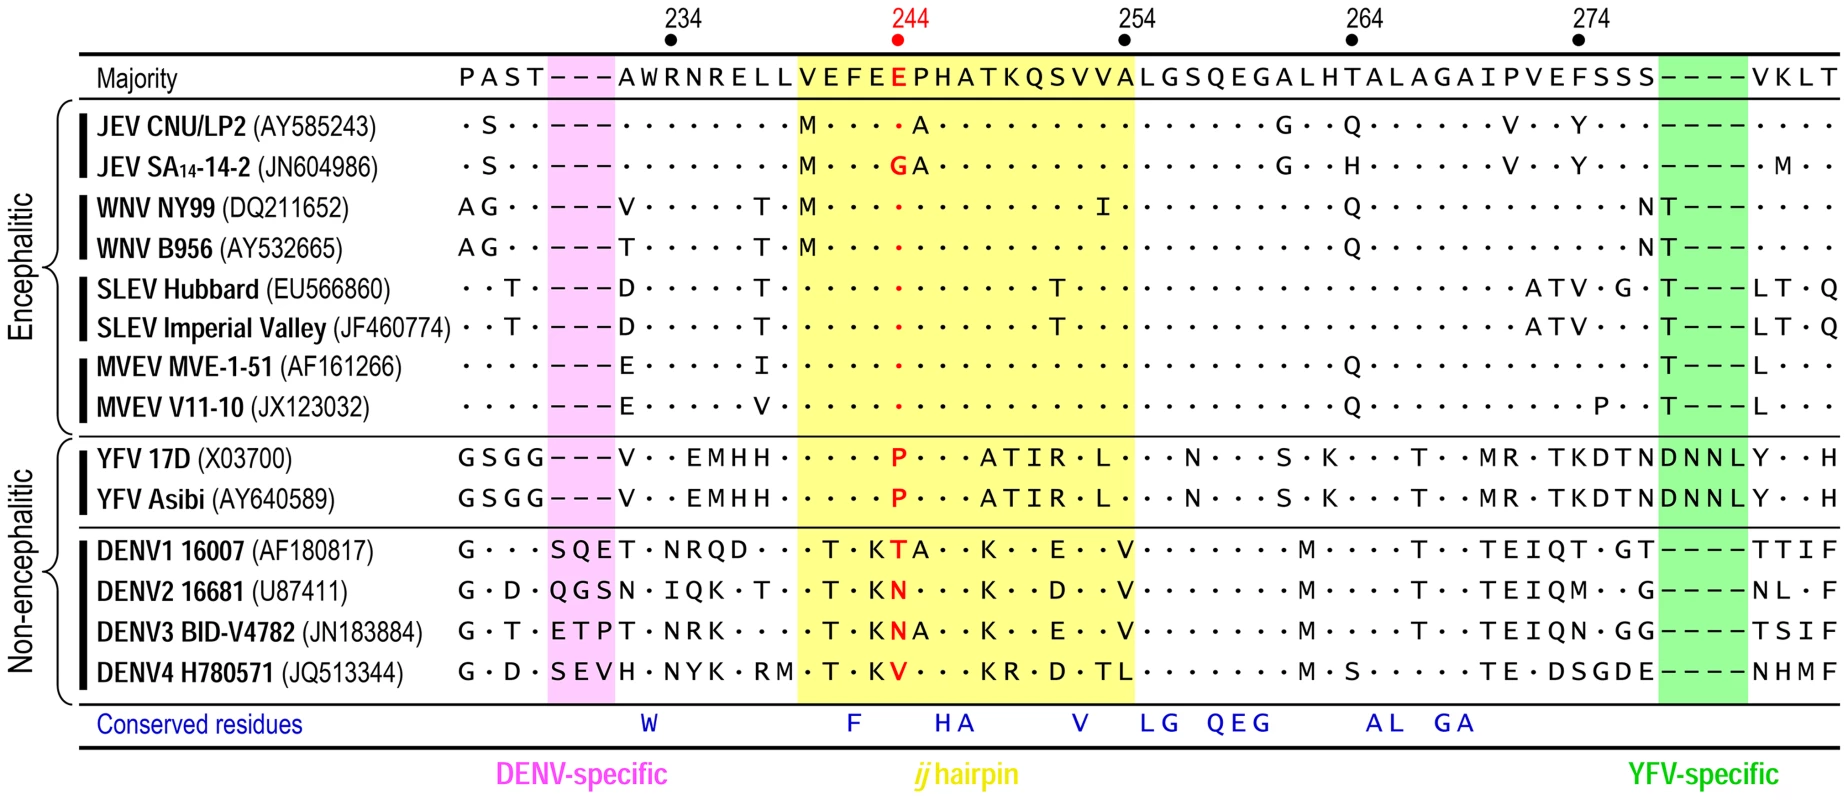 Structure-based, <i>ij</i>-hairpin amino acid sequence alignment for six representative flaviviruses (14 strains total): JEV, WNV, SLEV, MVEV, YFV, and DENV.